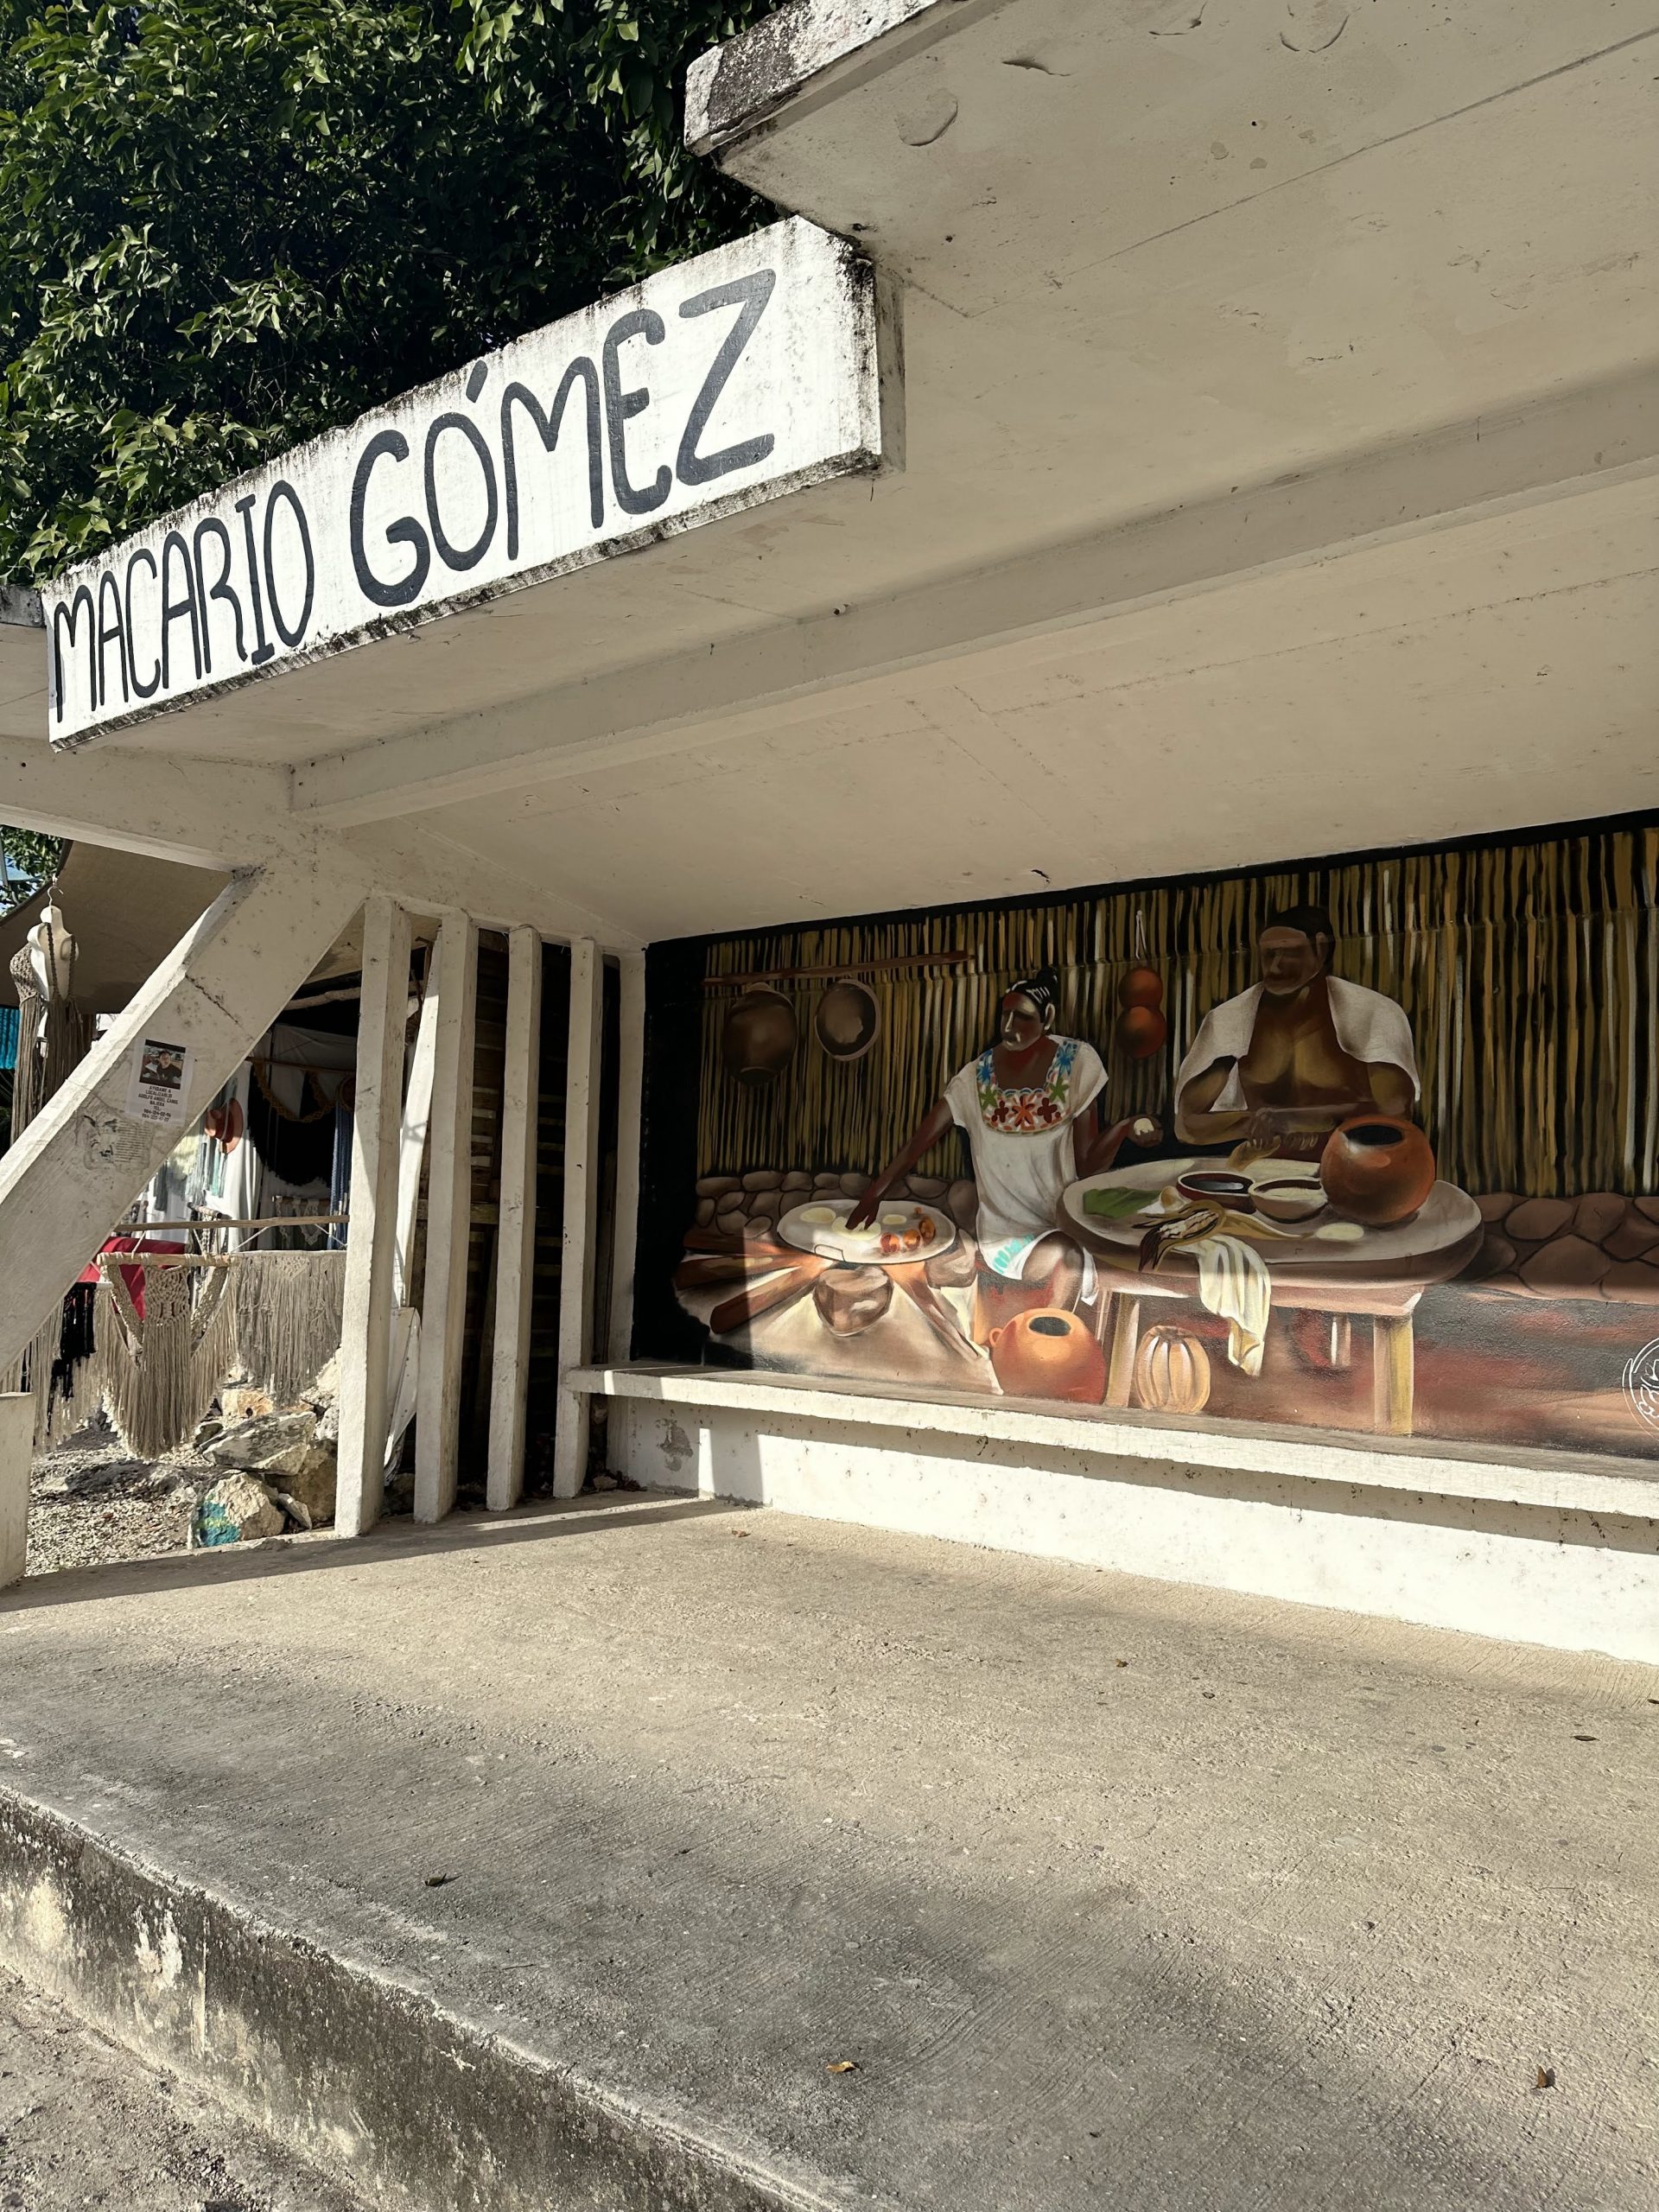 Support locals and buy local handicrafts in Macario Gomez